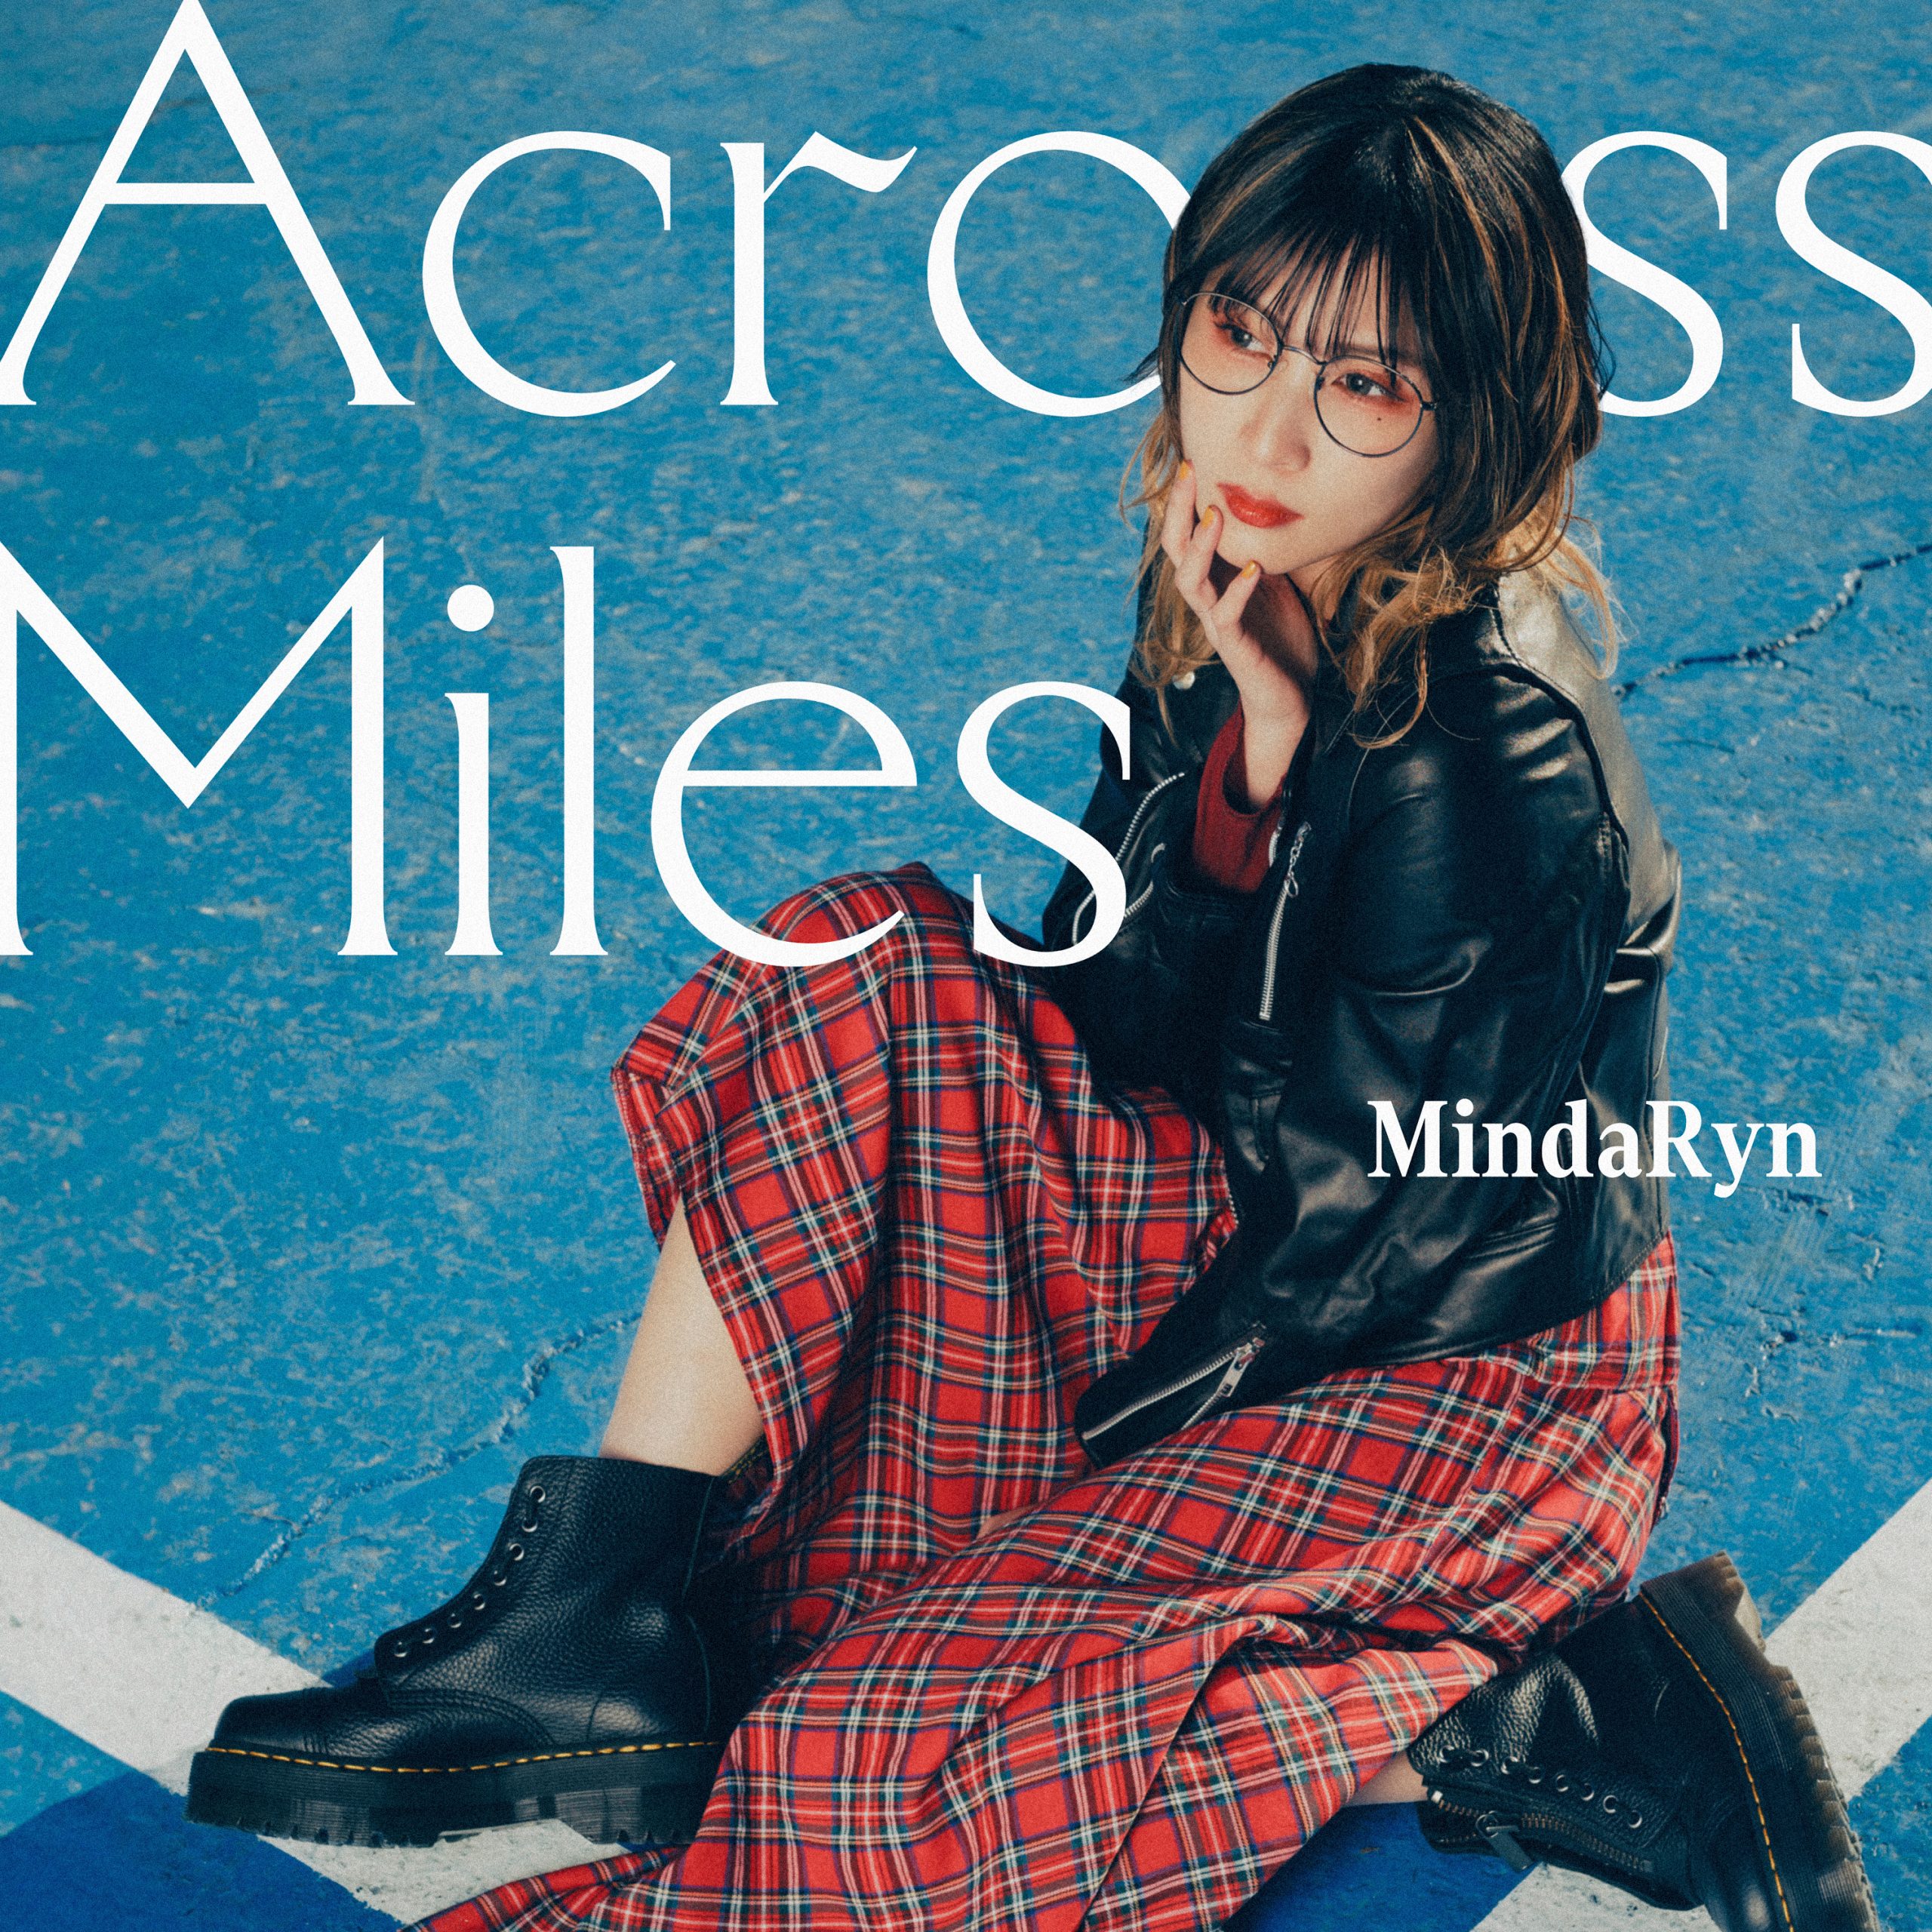 MindaRyn-2nd-Album-Main-Photo-scaled Thai Anime Singer MindaRyn to Release Long-Awaited 2nd Album "Across Miles" Featuring Numerous Anime Tie-Up Songs on August 21!